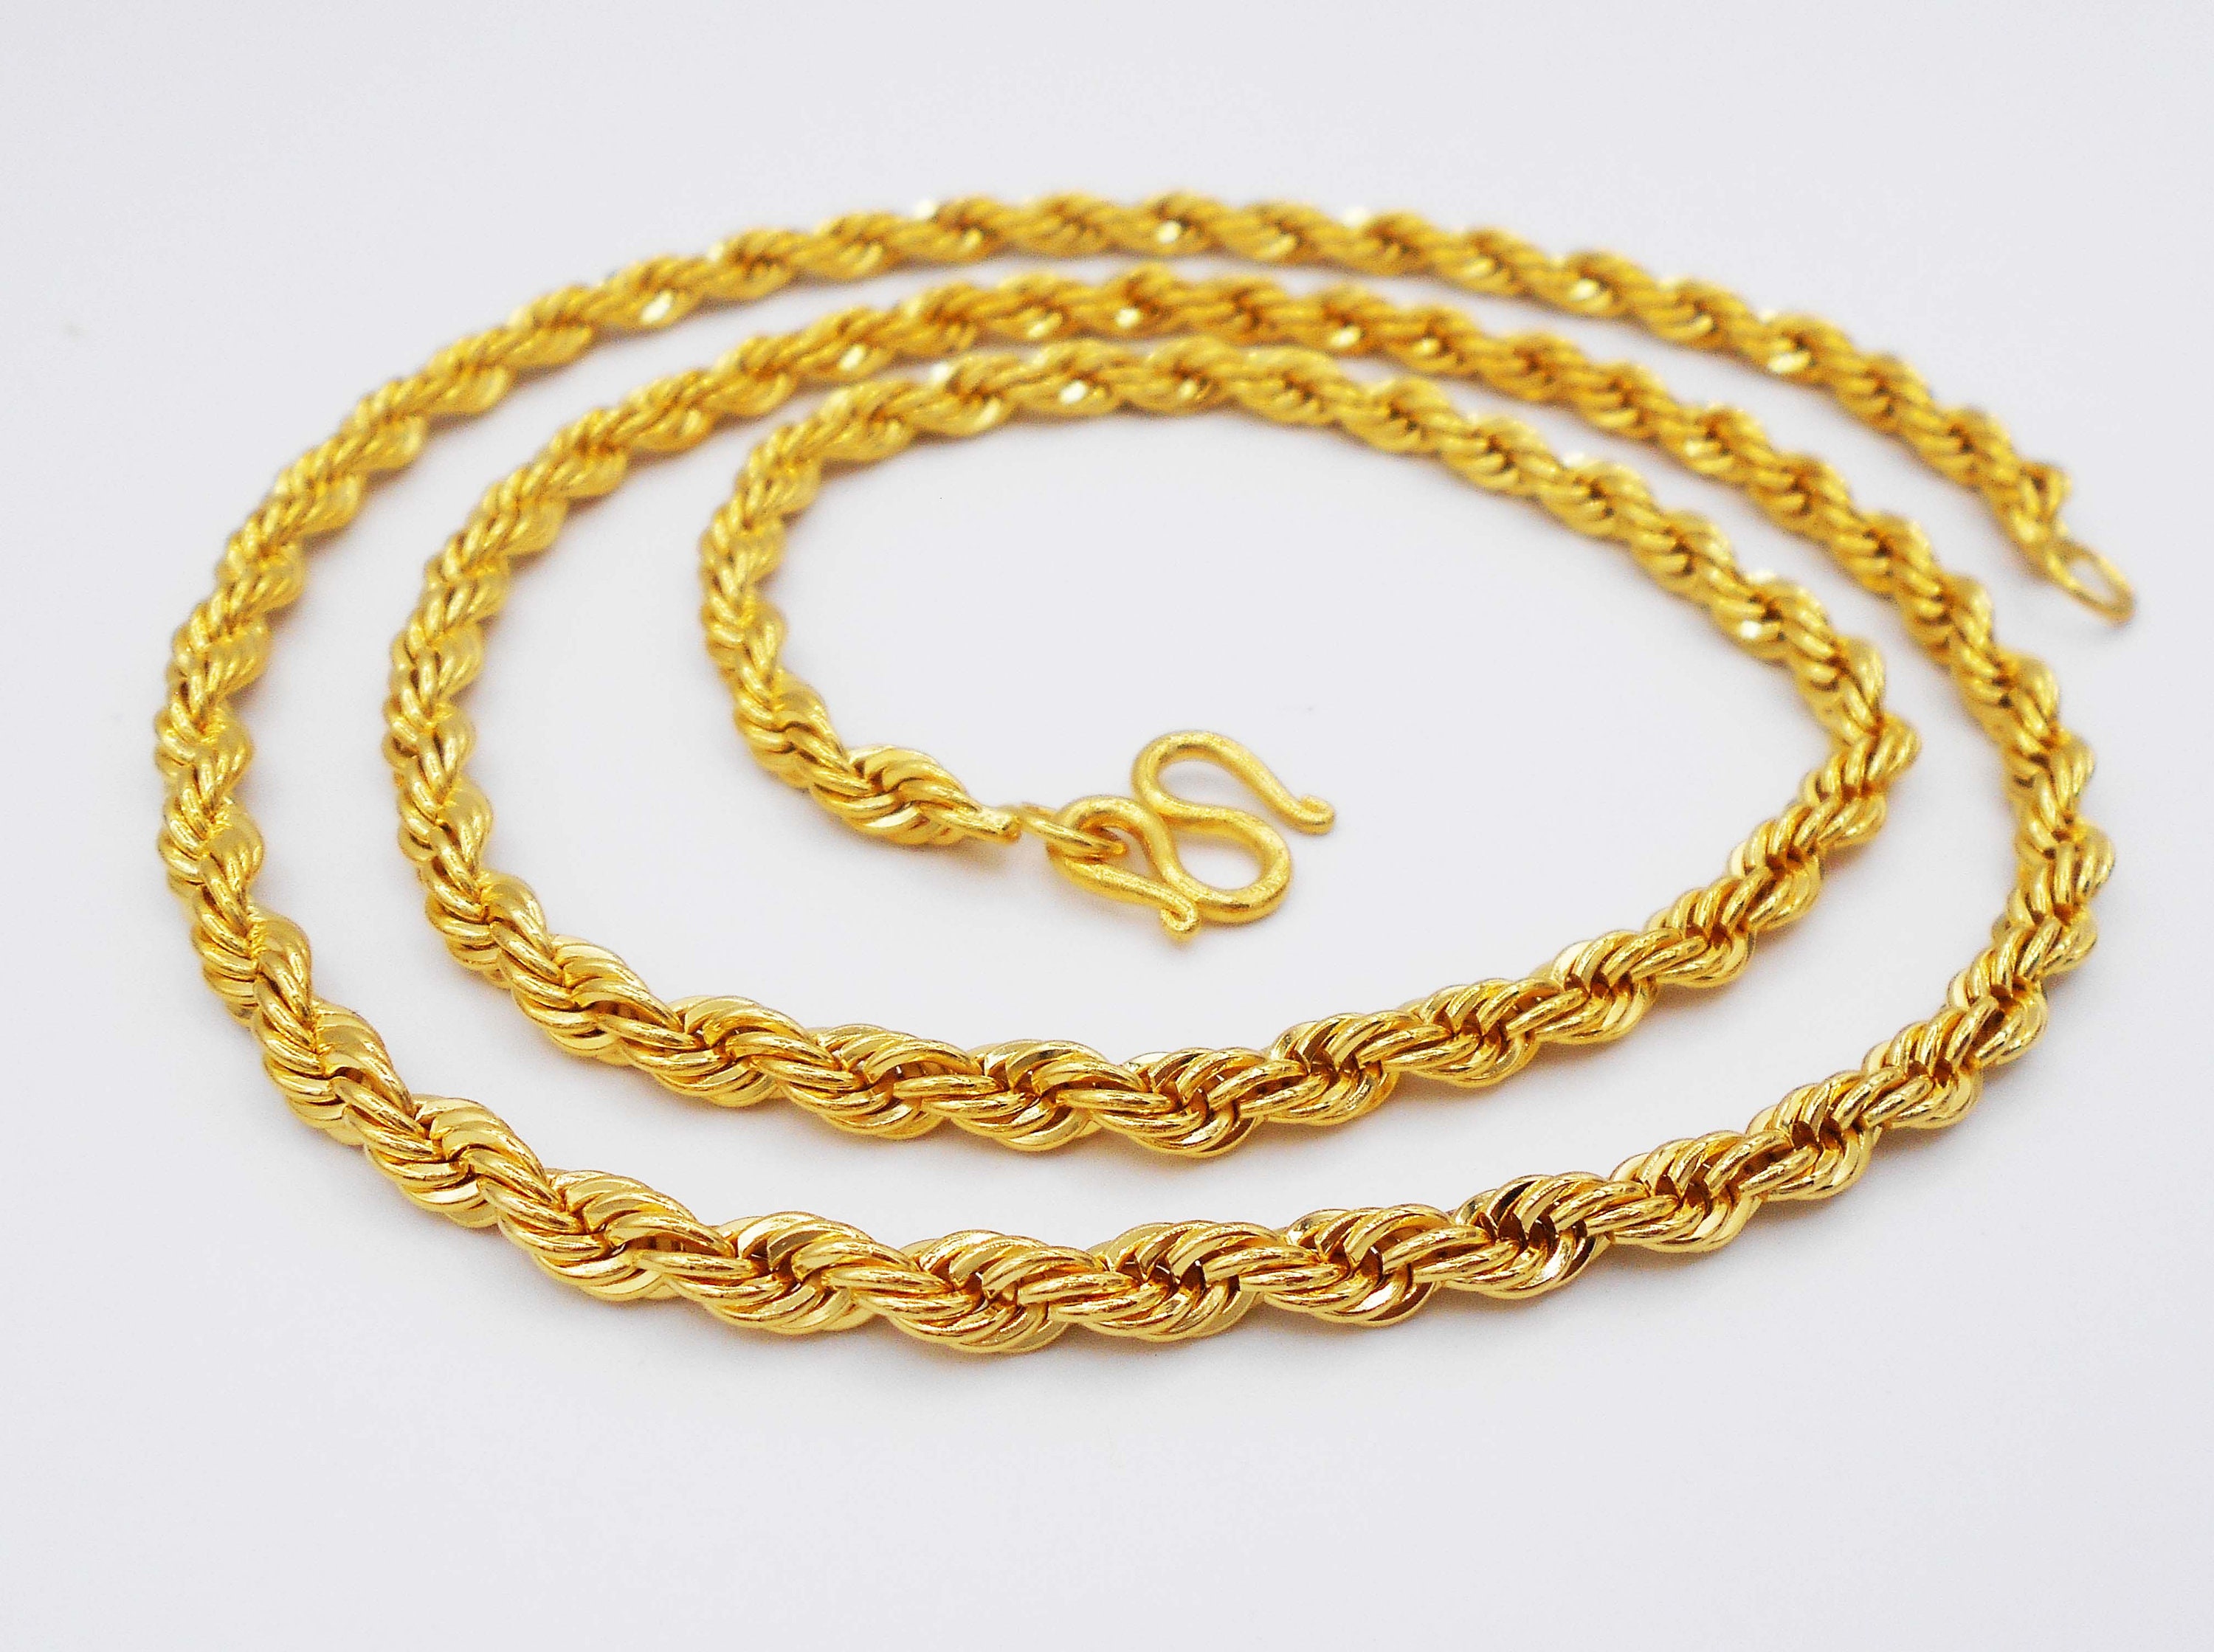 Chain 22K 23K 24K THAI BAHT GOLD GP NECKLACE 26 Inch 55 Grams 5 mm Jewelry 